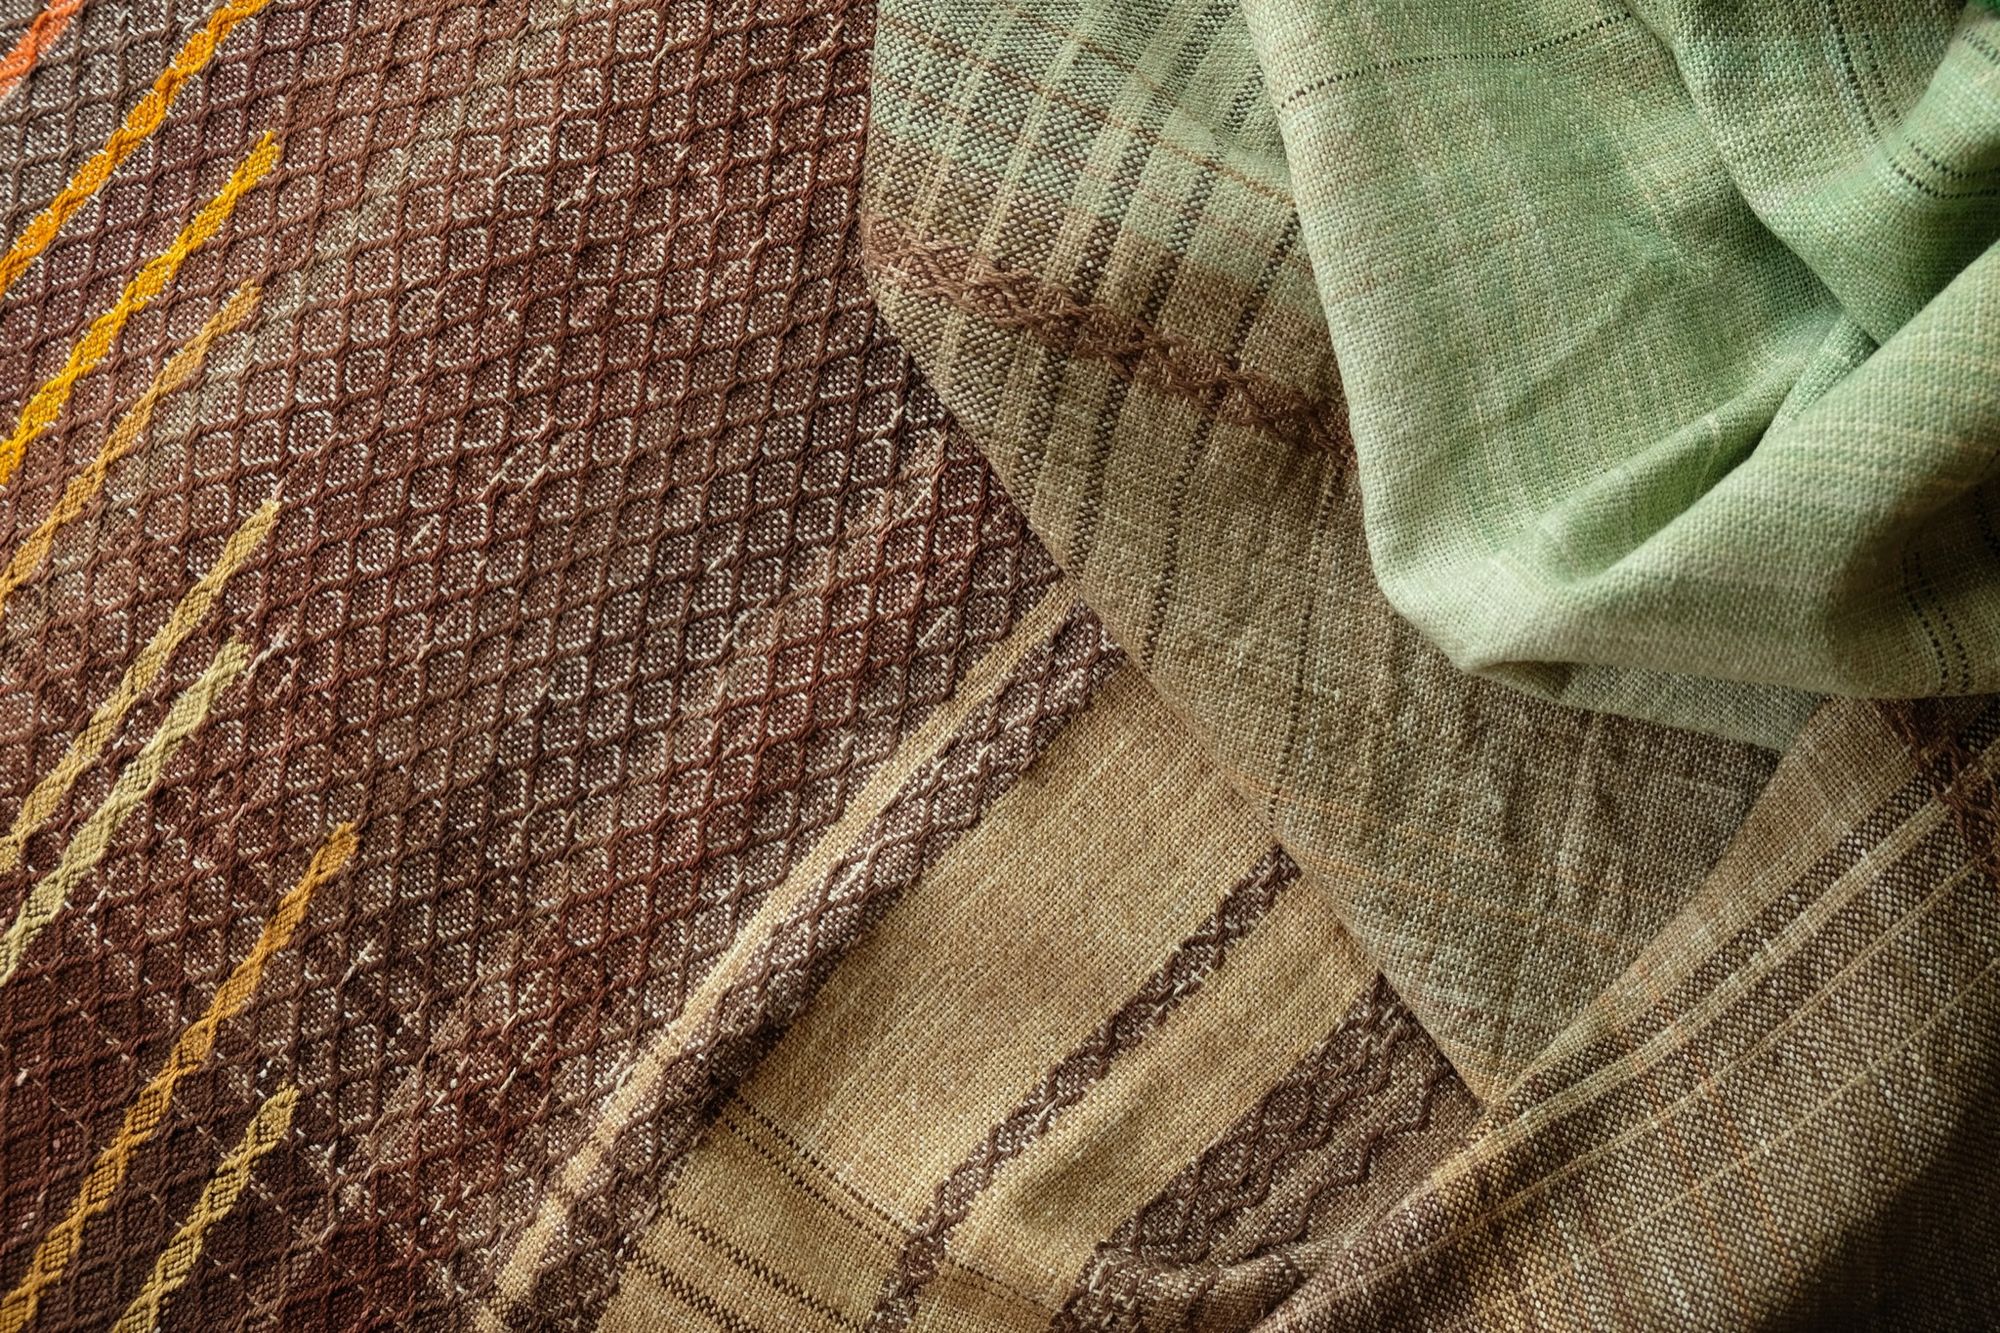 detail of Large brown, red, orange, yellow, blue and green piece of handwoven fabric laying on a wooden floor. 